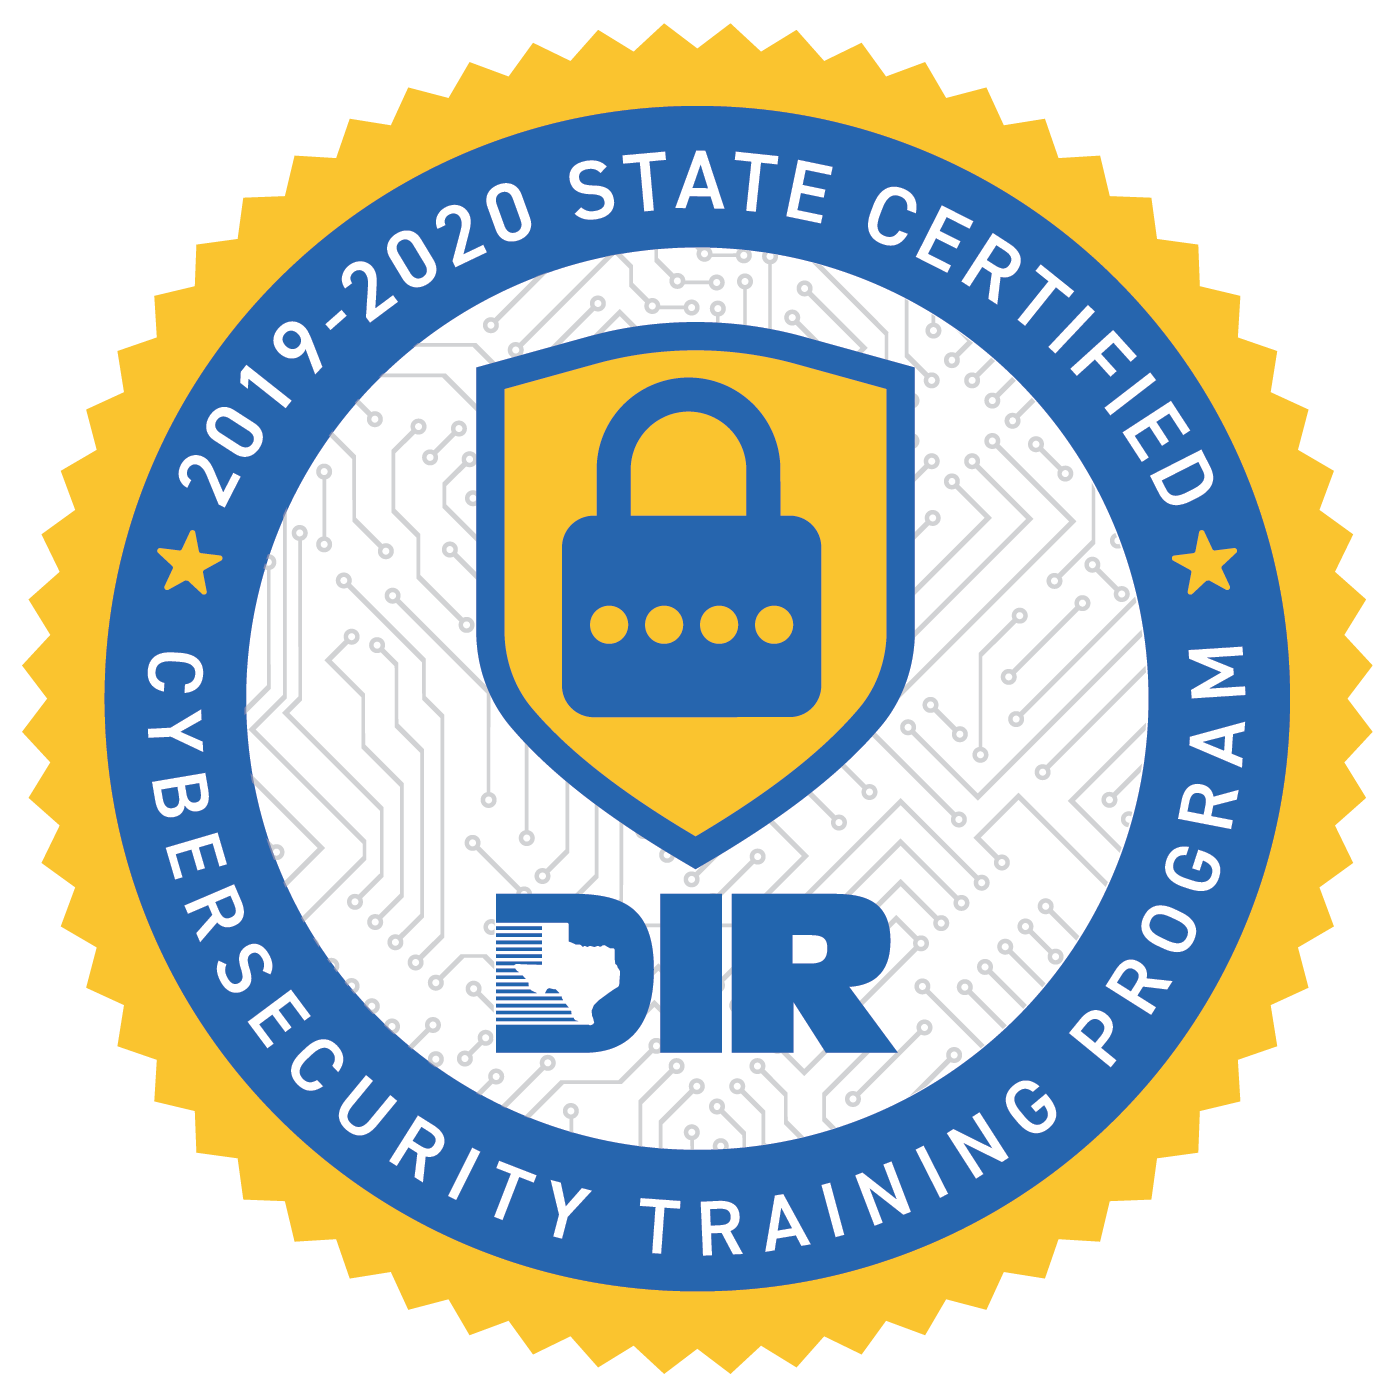 KnowBe4 Brings Security Awareness Training to the State of Texas Thanks to New Certified Status